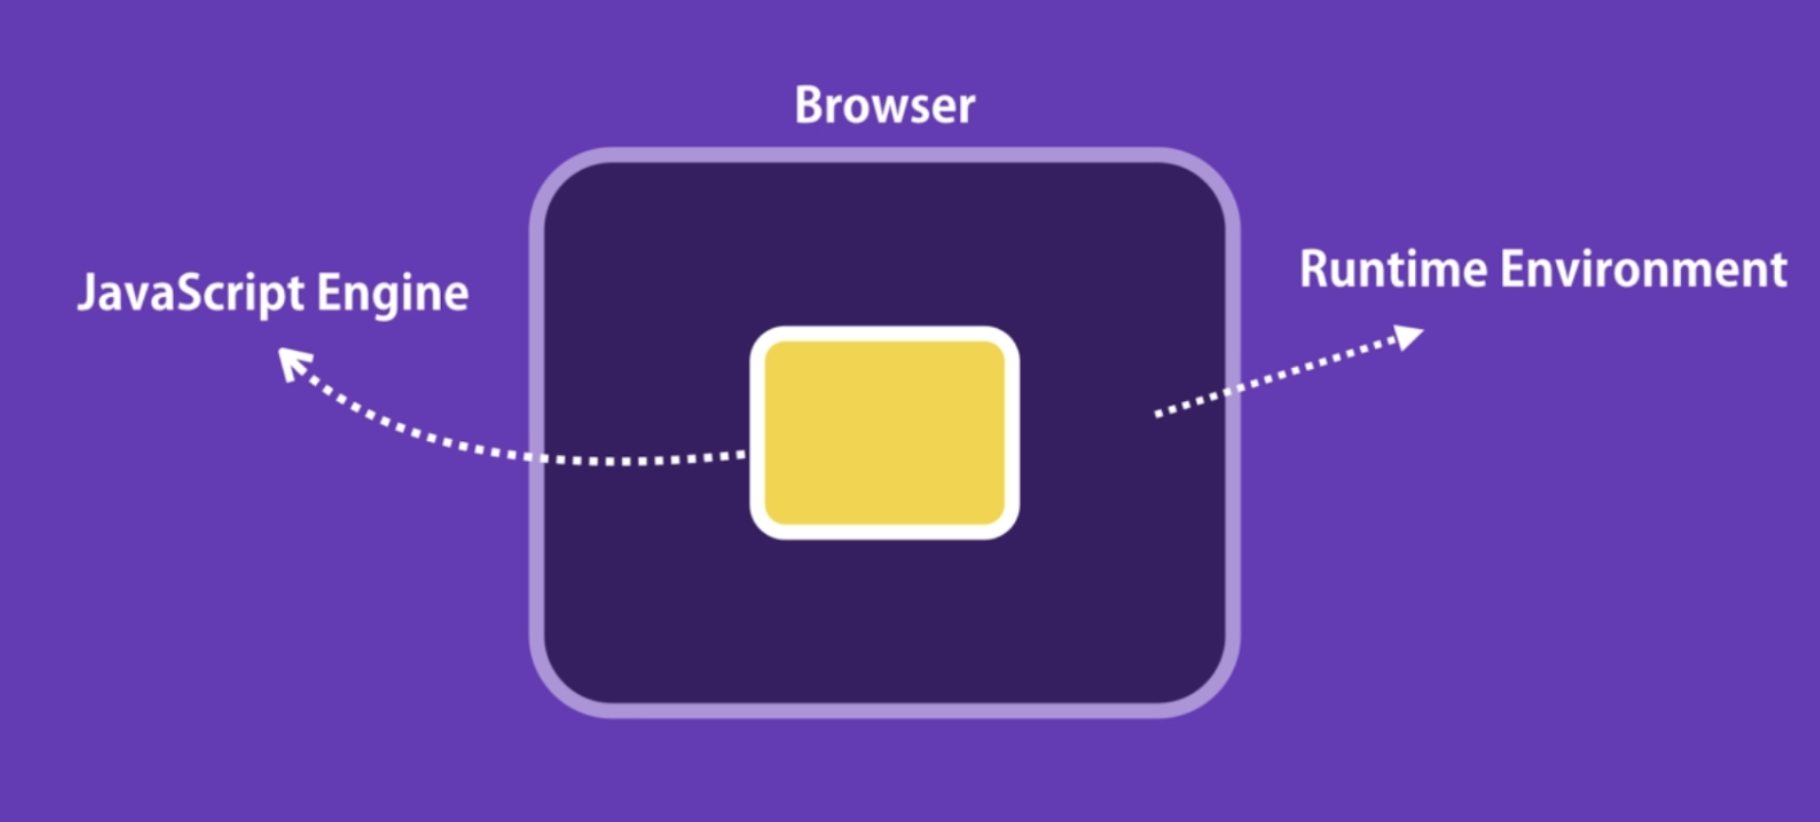 The browser provides a runtime environment for the Javascript code.